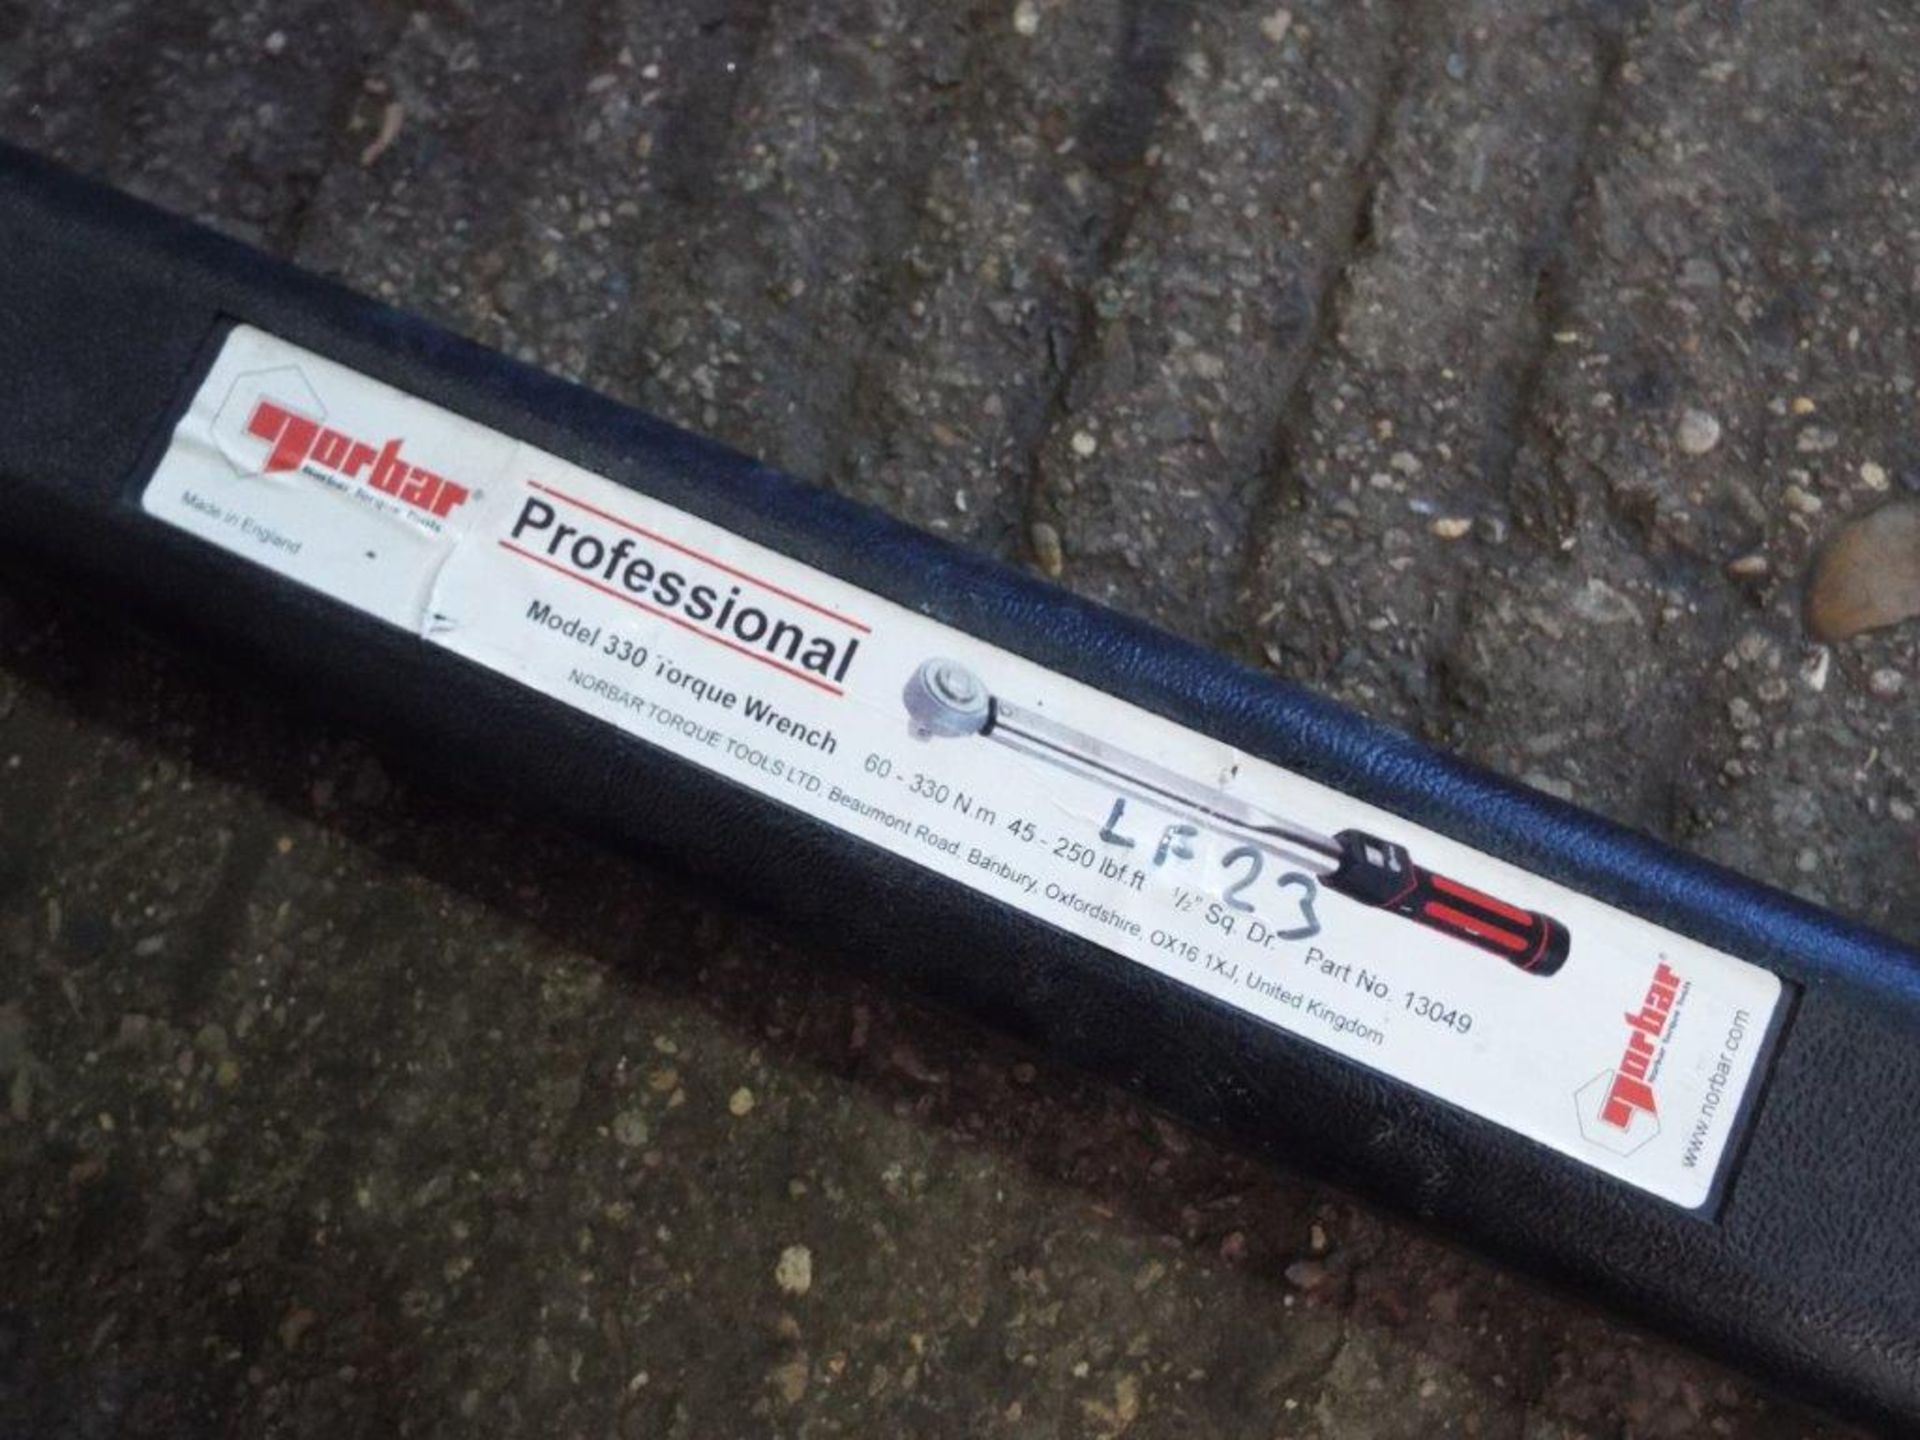 Norbar 330 Professional Torque Wrench - Image 6 of 8